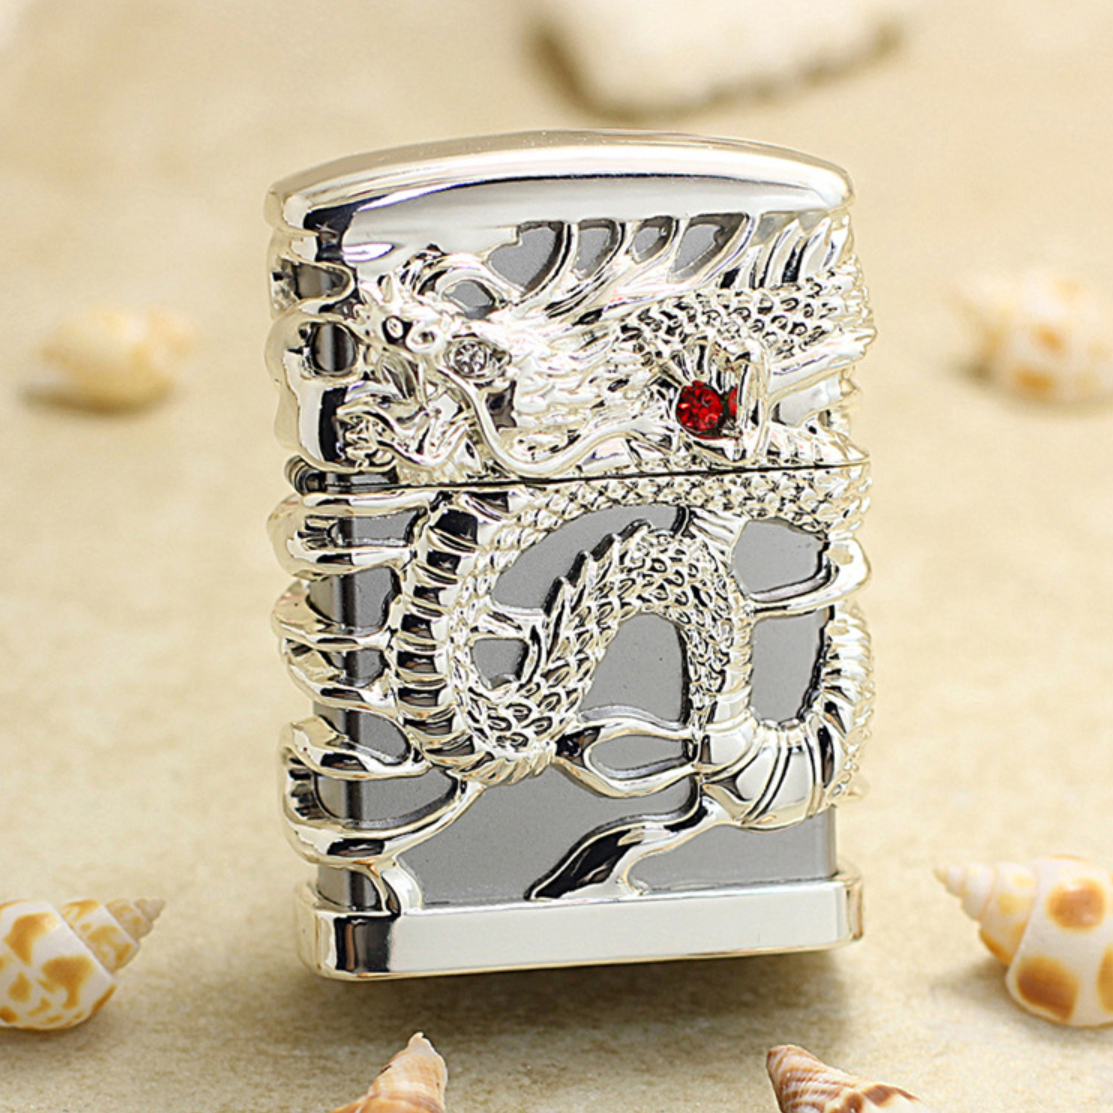 Zippo Plated Silver Dragon Jacket Lighter